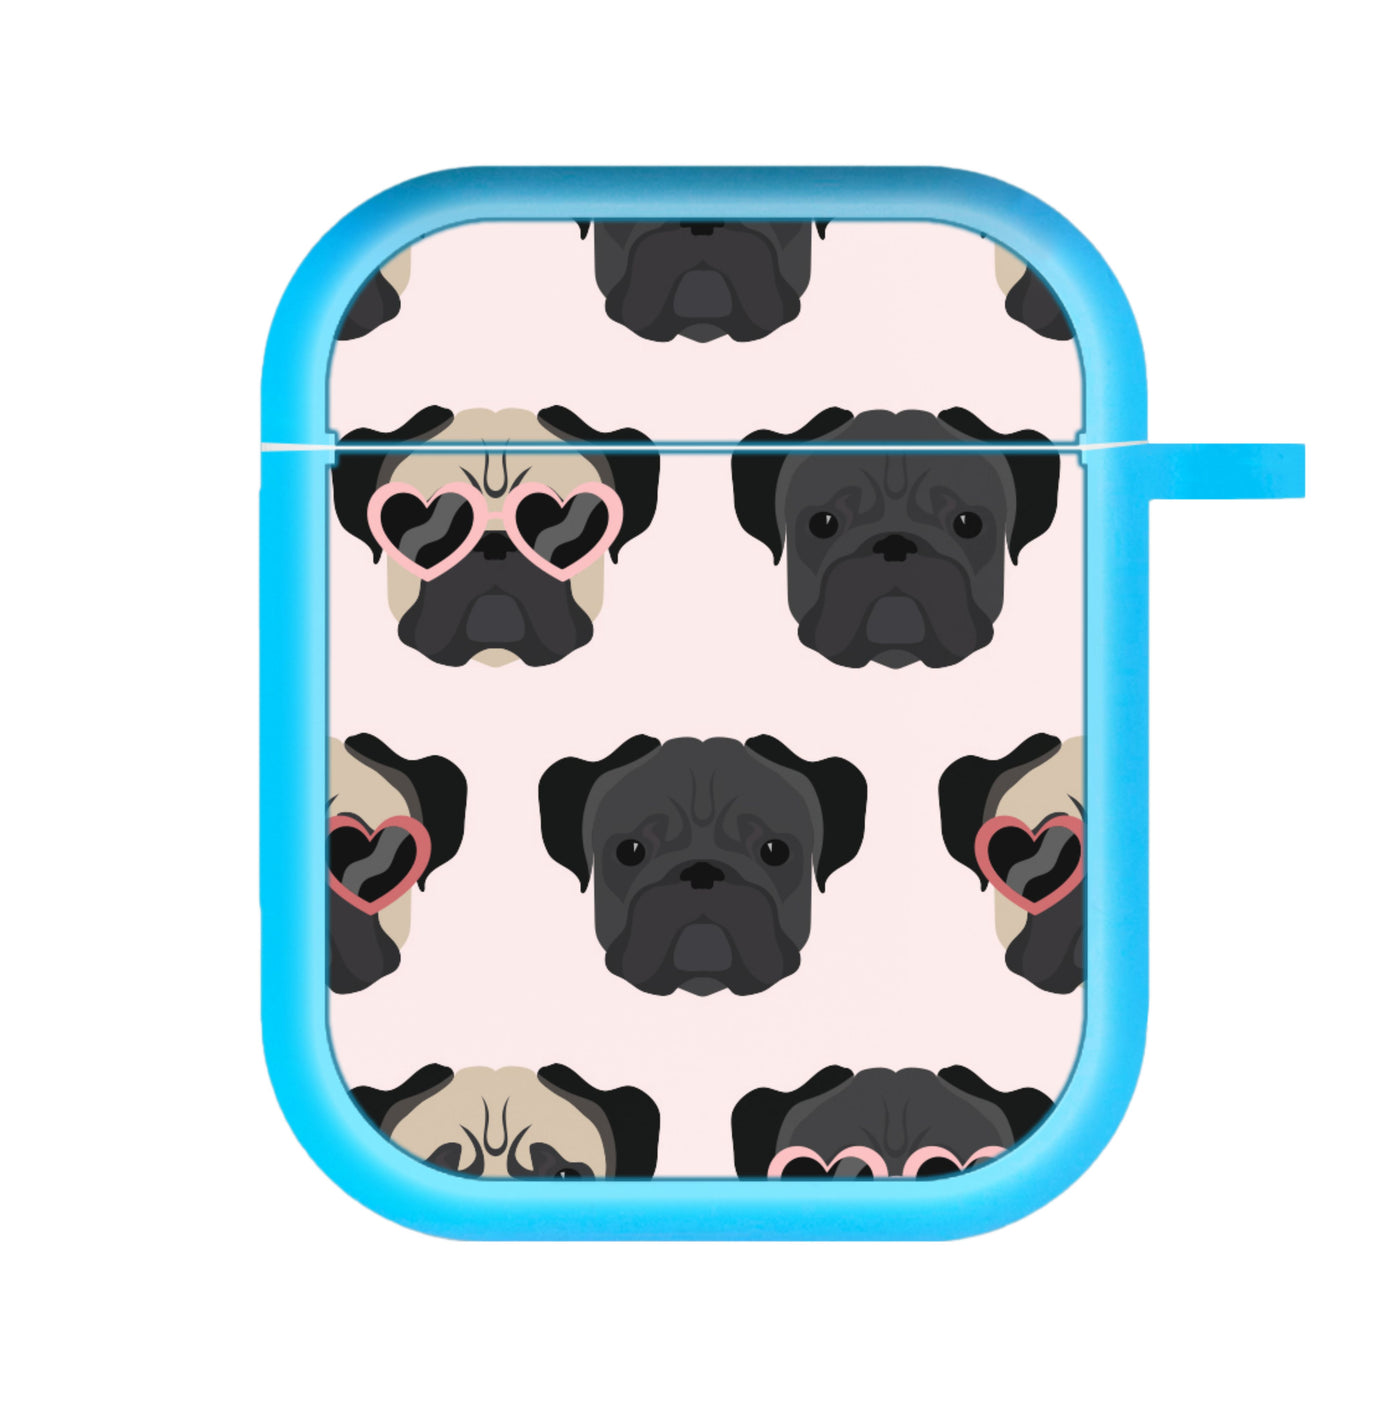 Sunny Pug Life - Dog Pattern AirPods Case